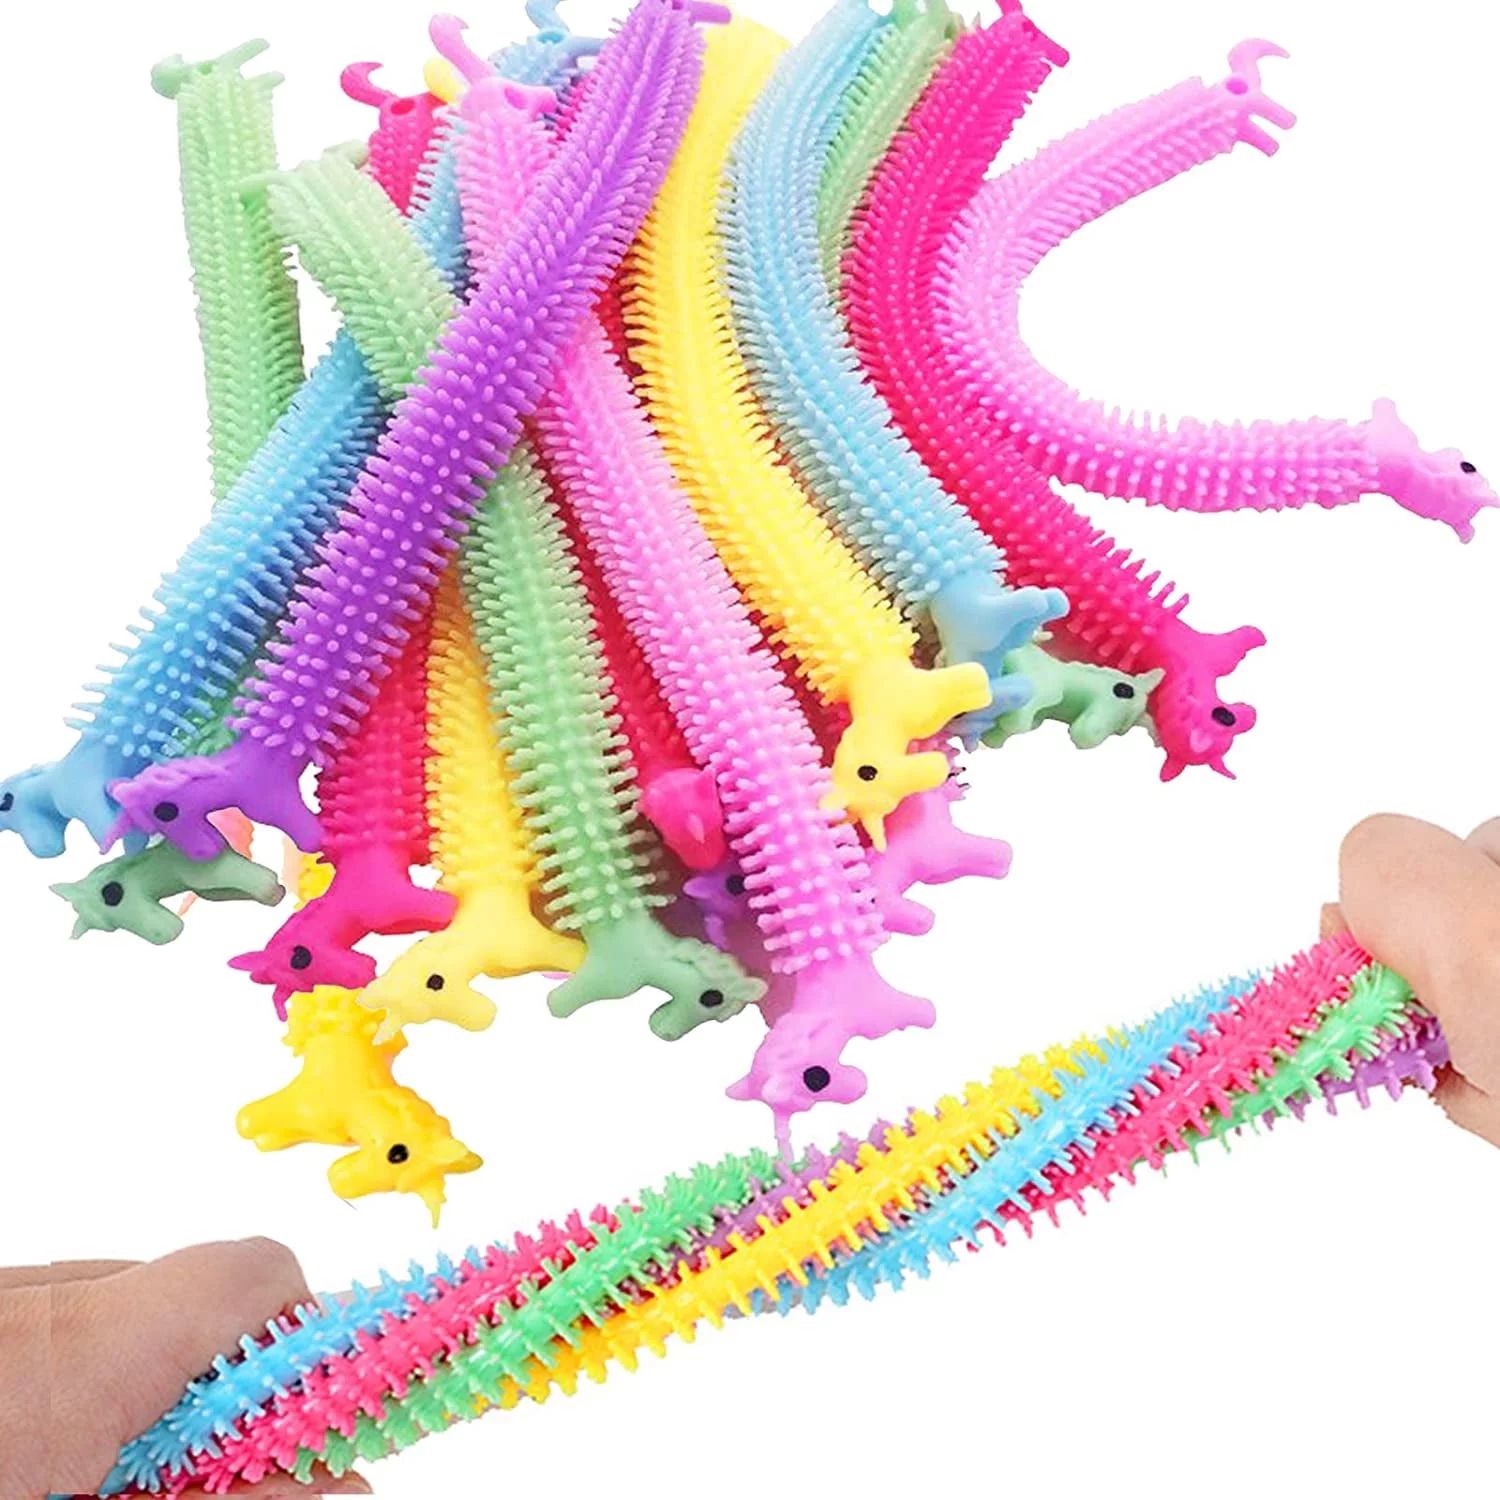 GuassLee 15Pcs Sensory Stress Toys Unicorn Stretchy String Toys 7.9inch Mixedcolor for Anti Anxie... | Walmart (US)